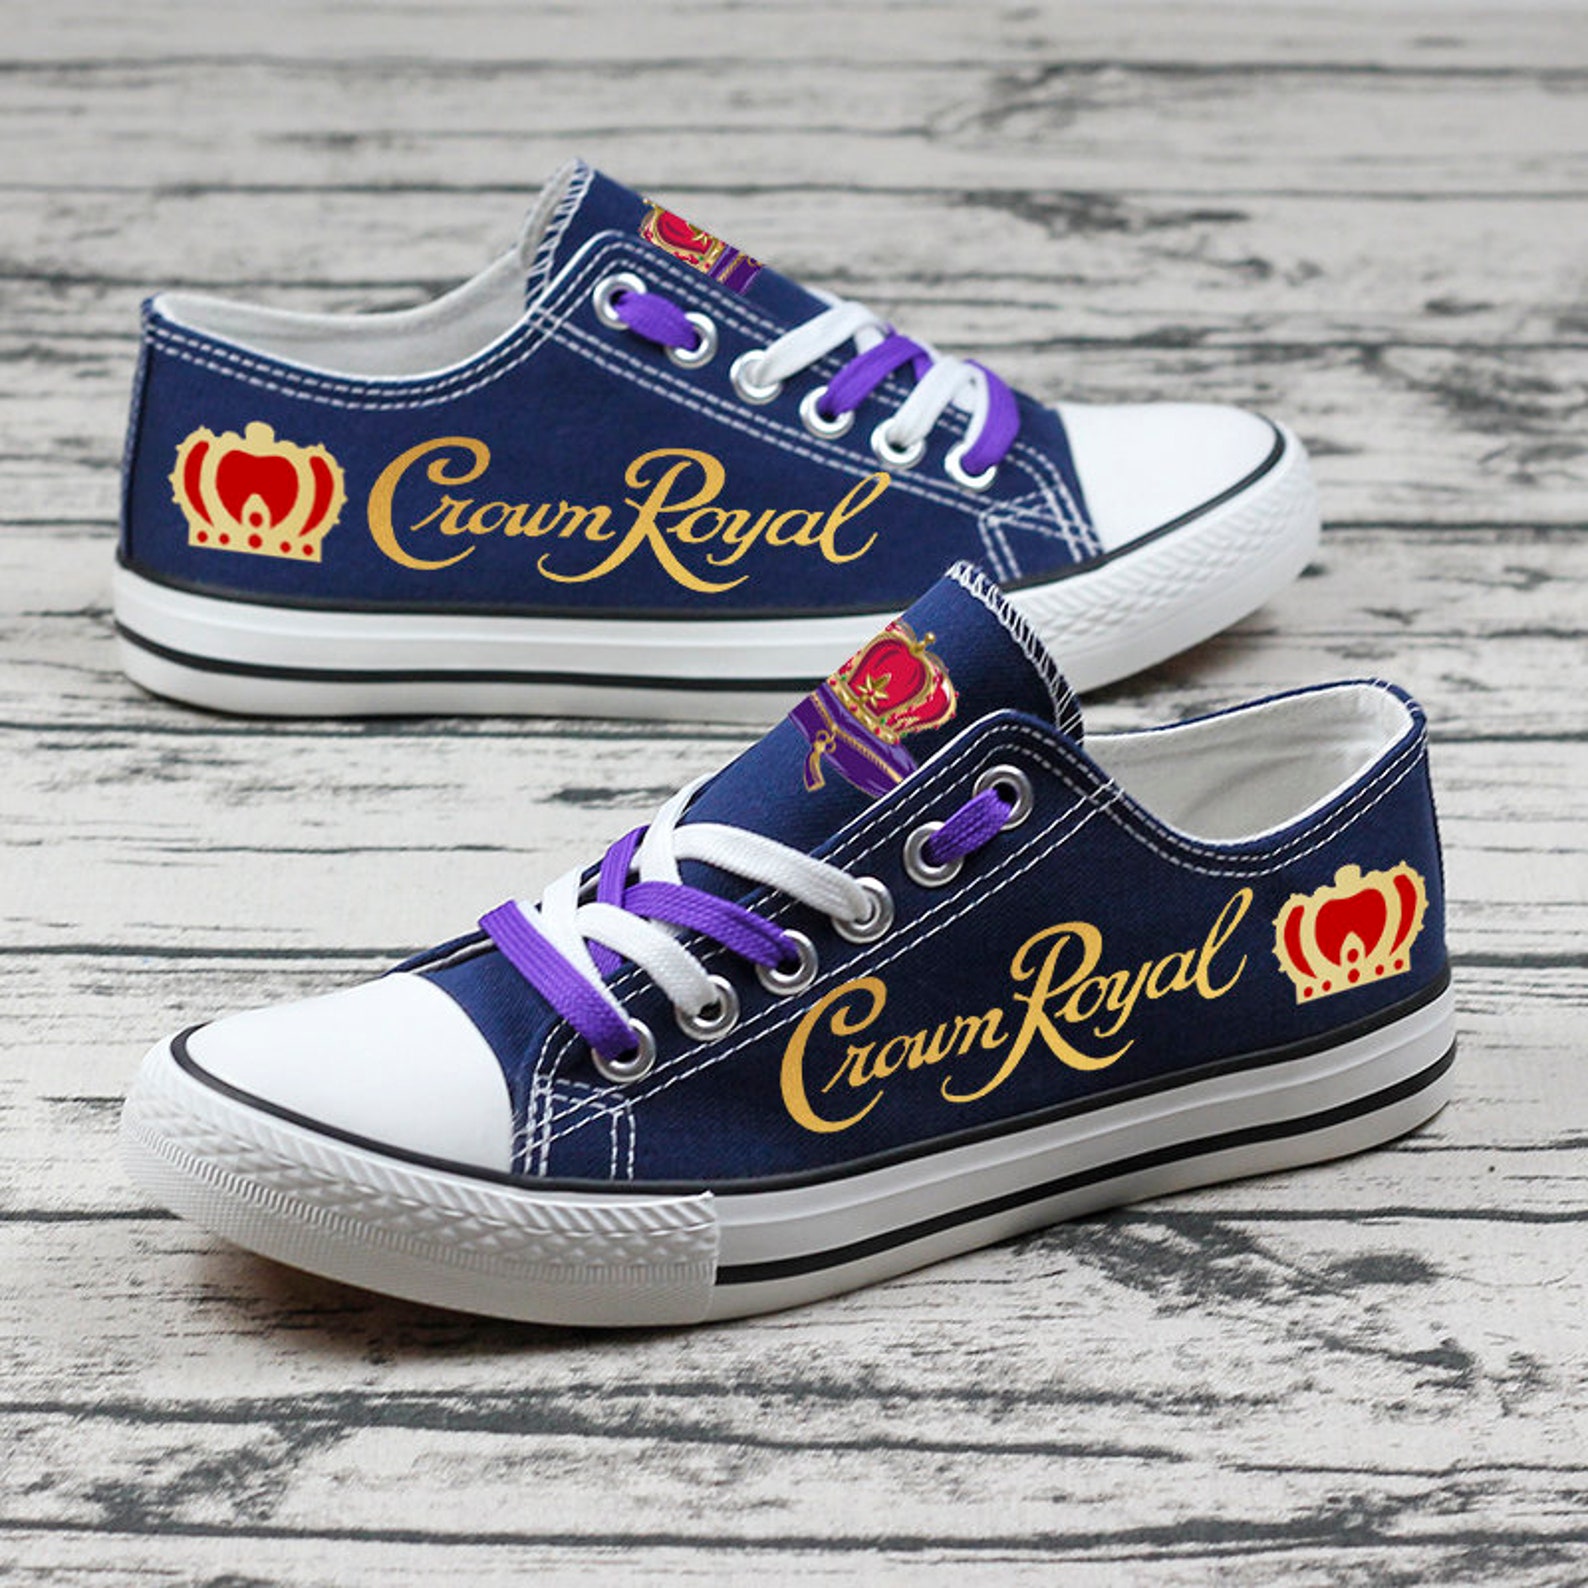 Crown Royal Canadian Whisky Blue Low Top Shoes Whisky